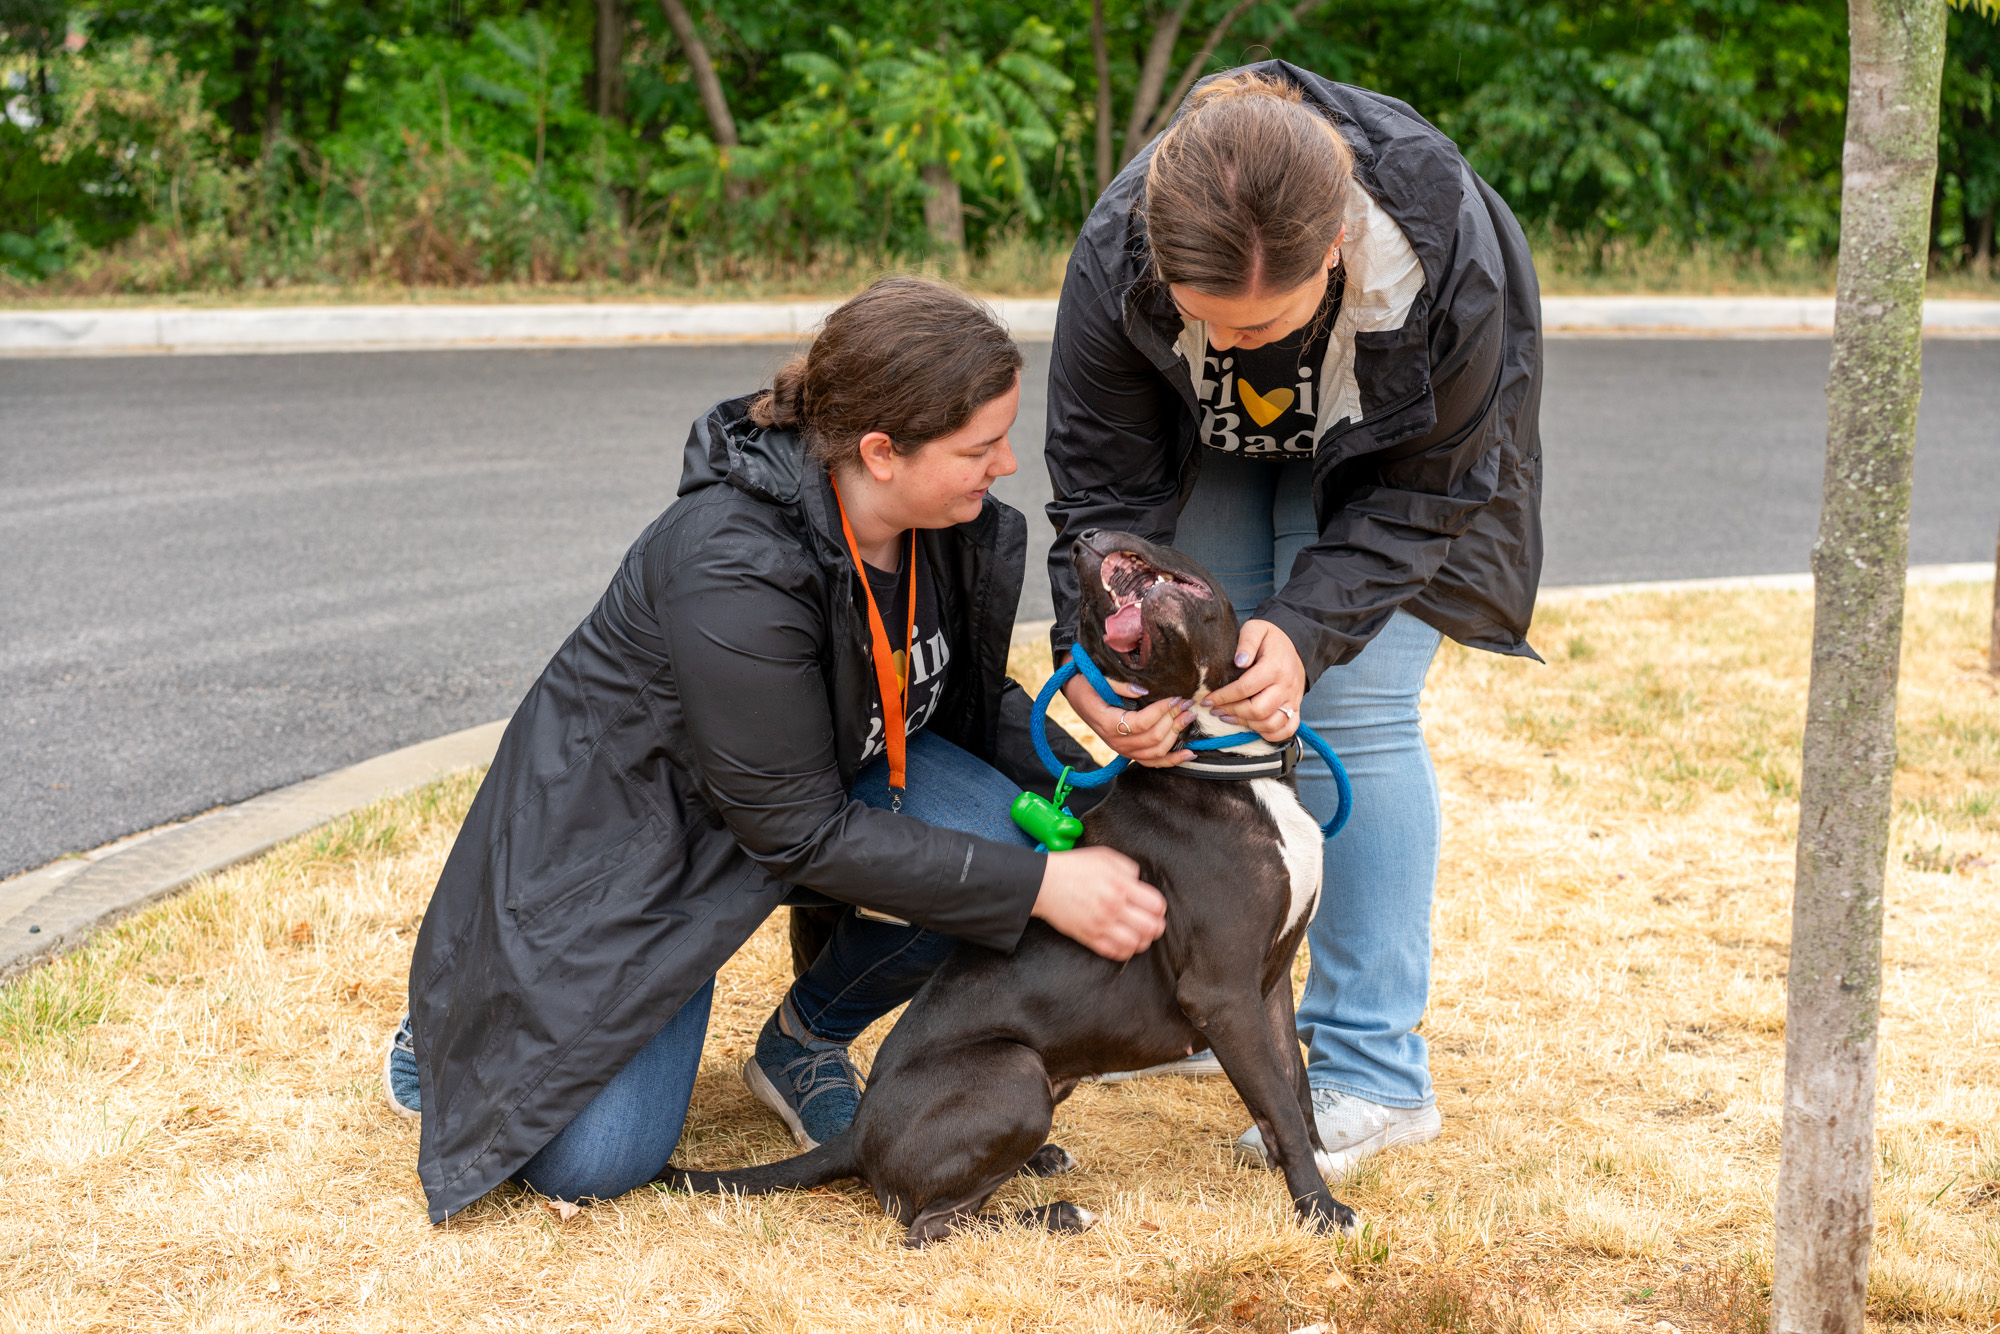 Colleen McNulty and Makayla Mullikin crouch down to pet a black dog at BARCS.